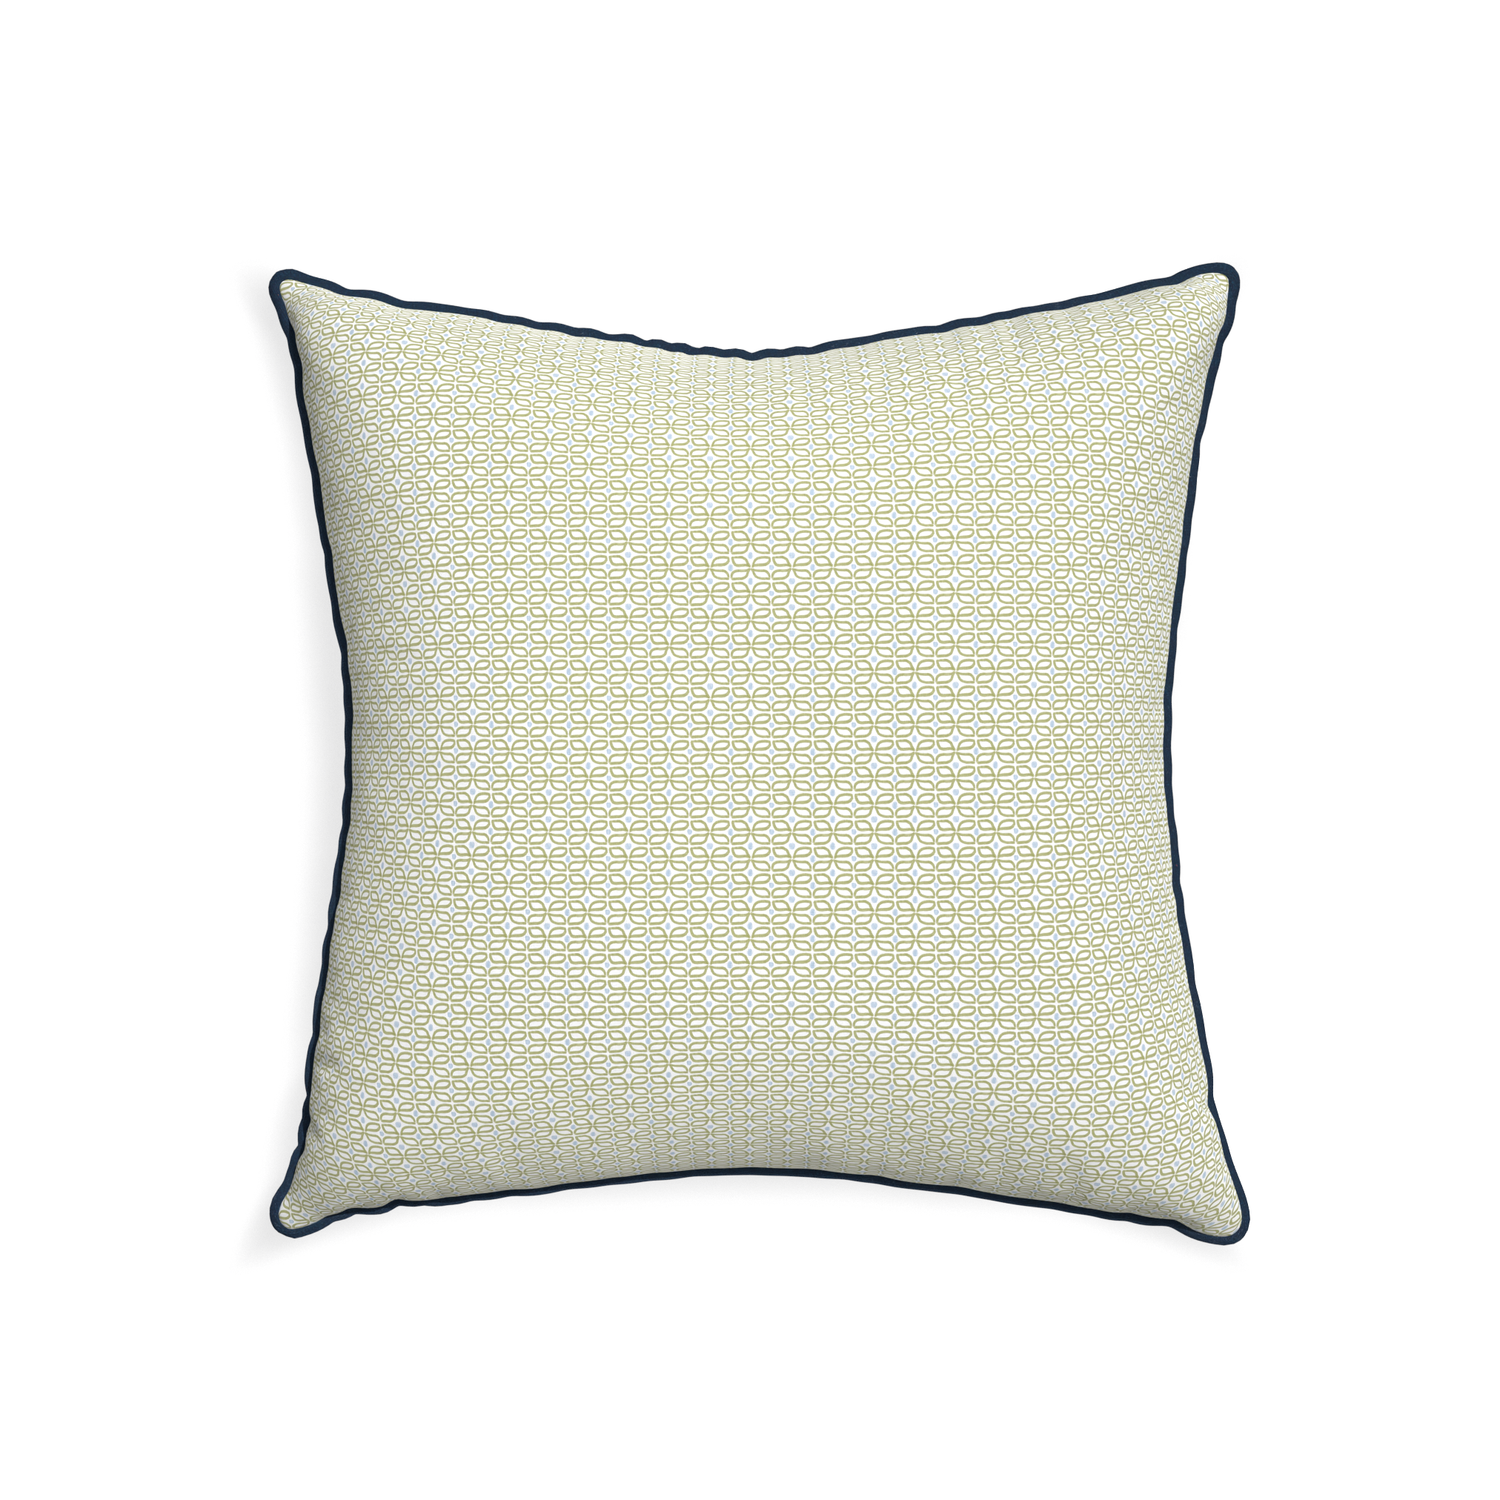 22-square loomi moss custom moss green geometricpillow with c piping on white background